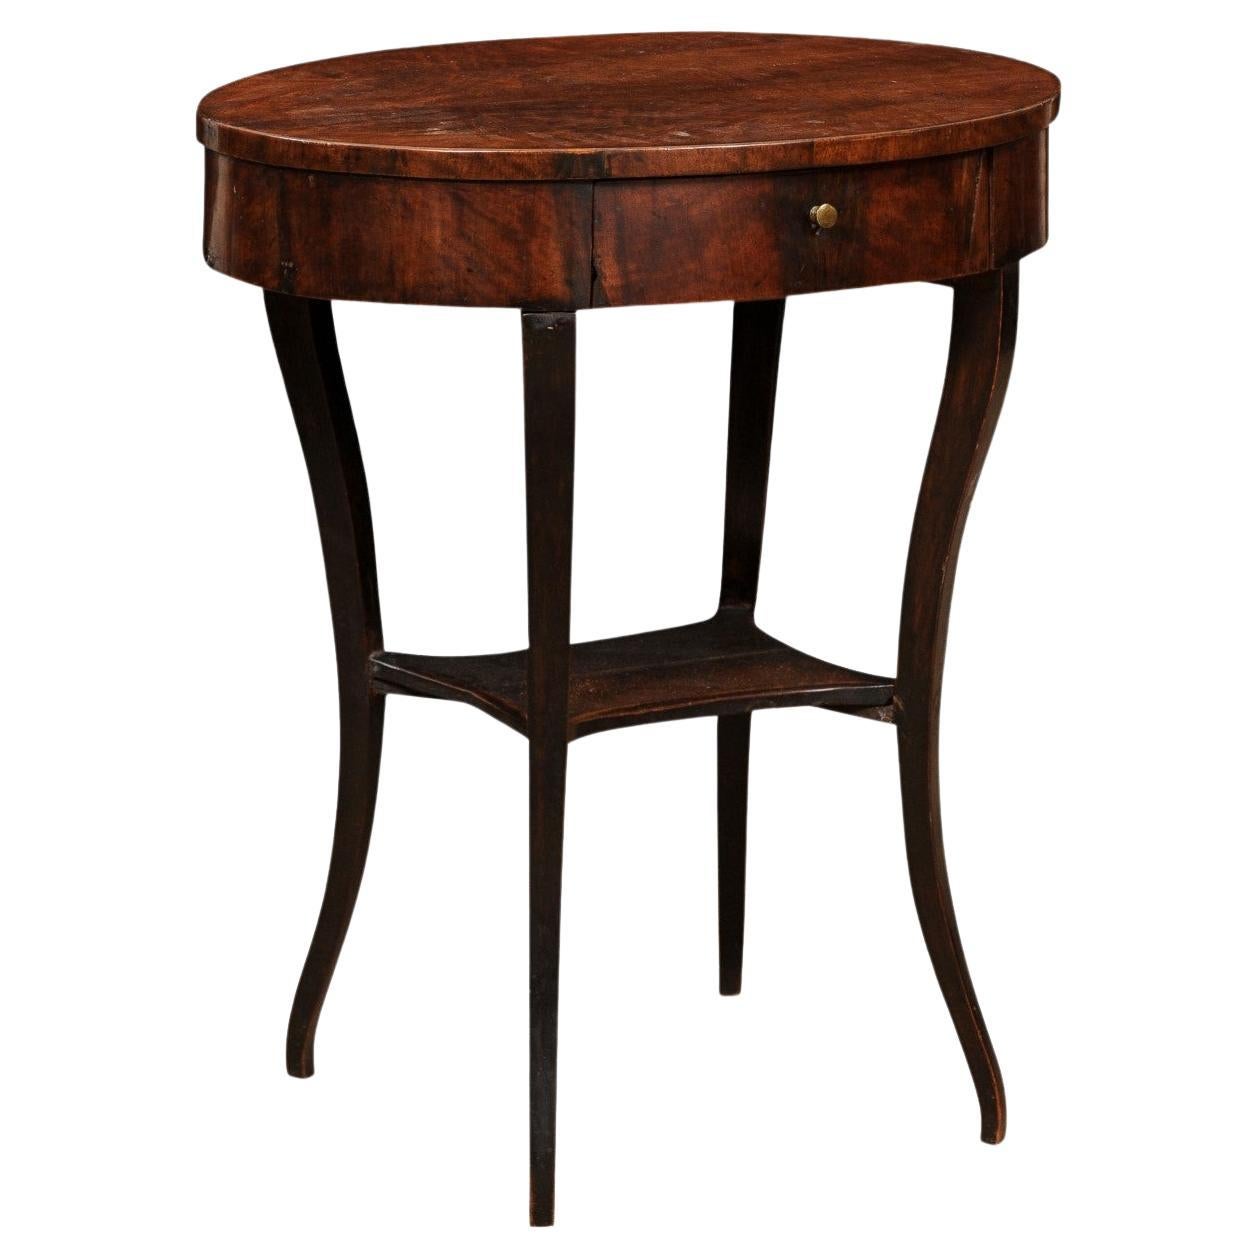 Oval 19th Century Italian Walnut Side Table with Drawer and Splayed Legs